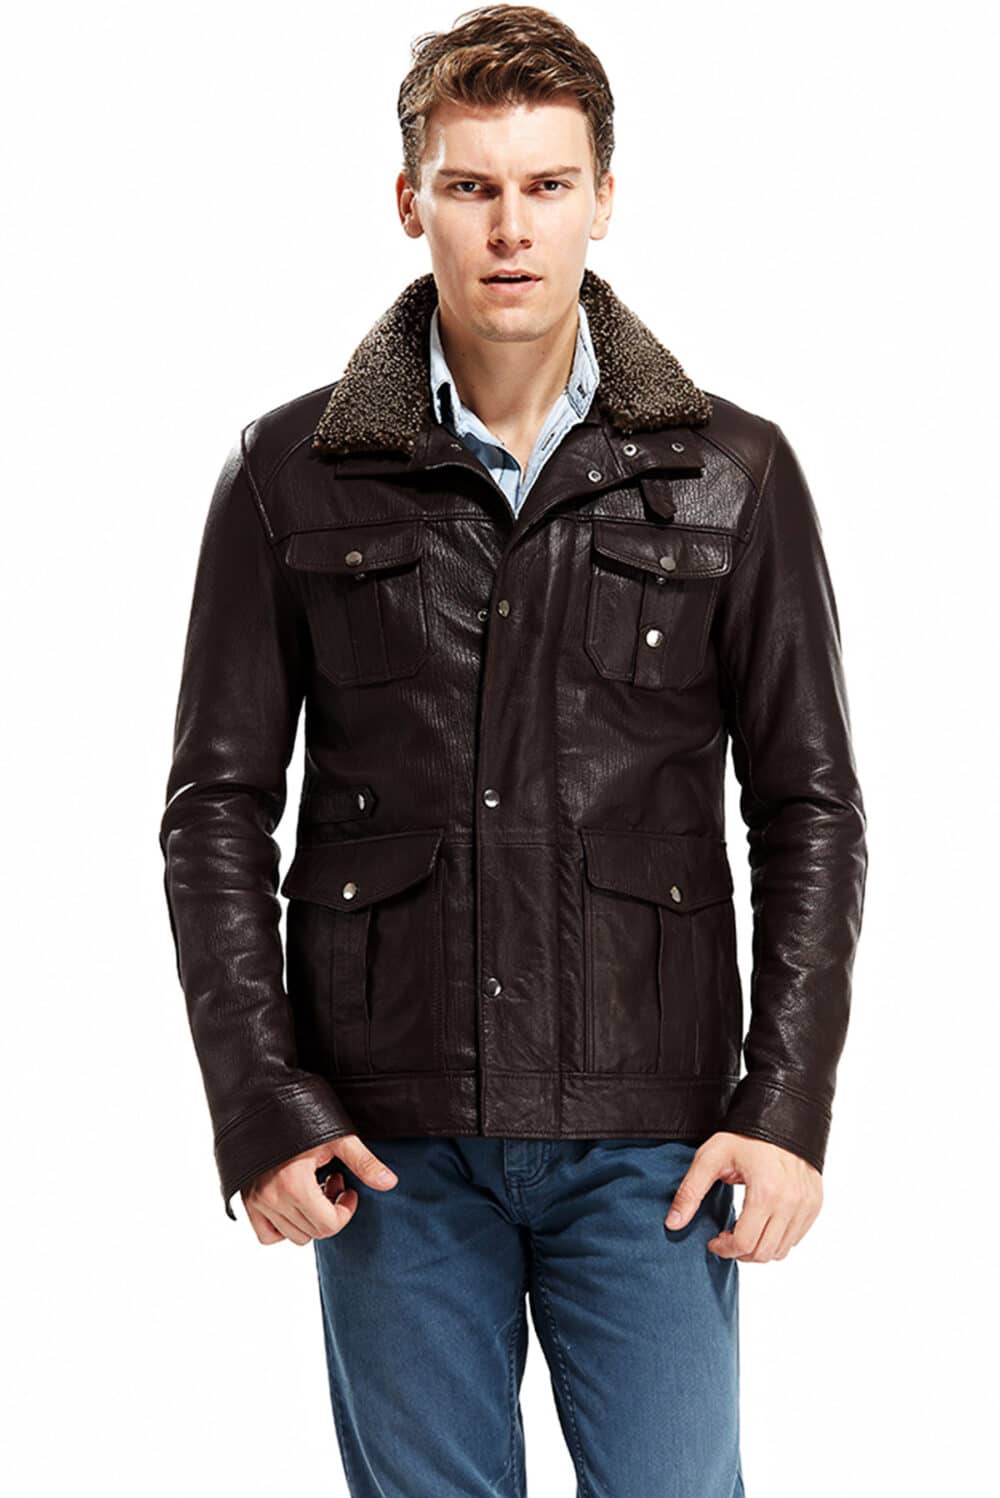 Willy Cartier Men's 100 % Real Brown Leather Moto Jacket